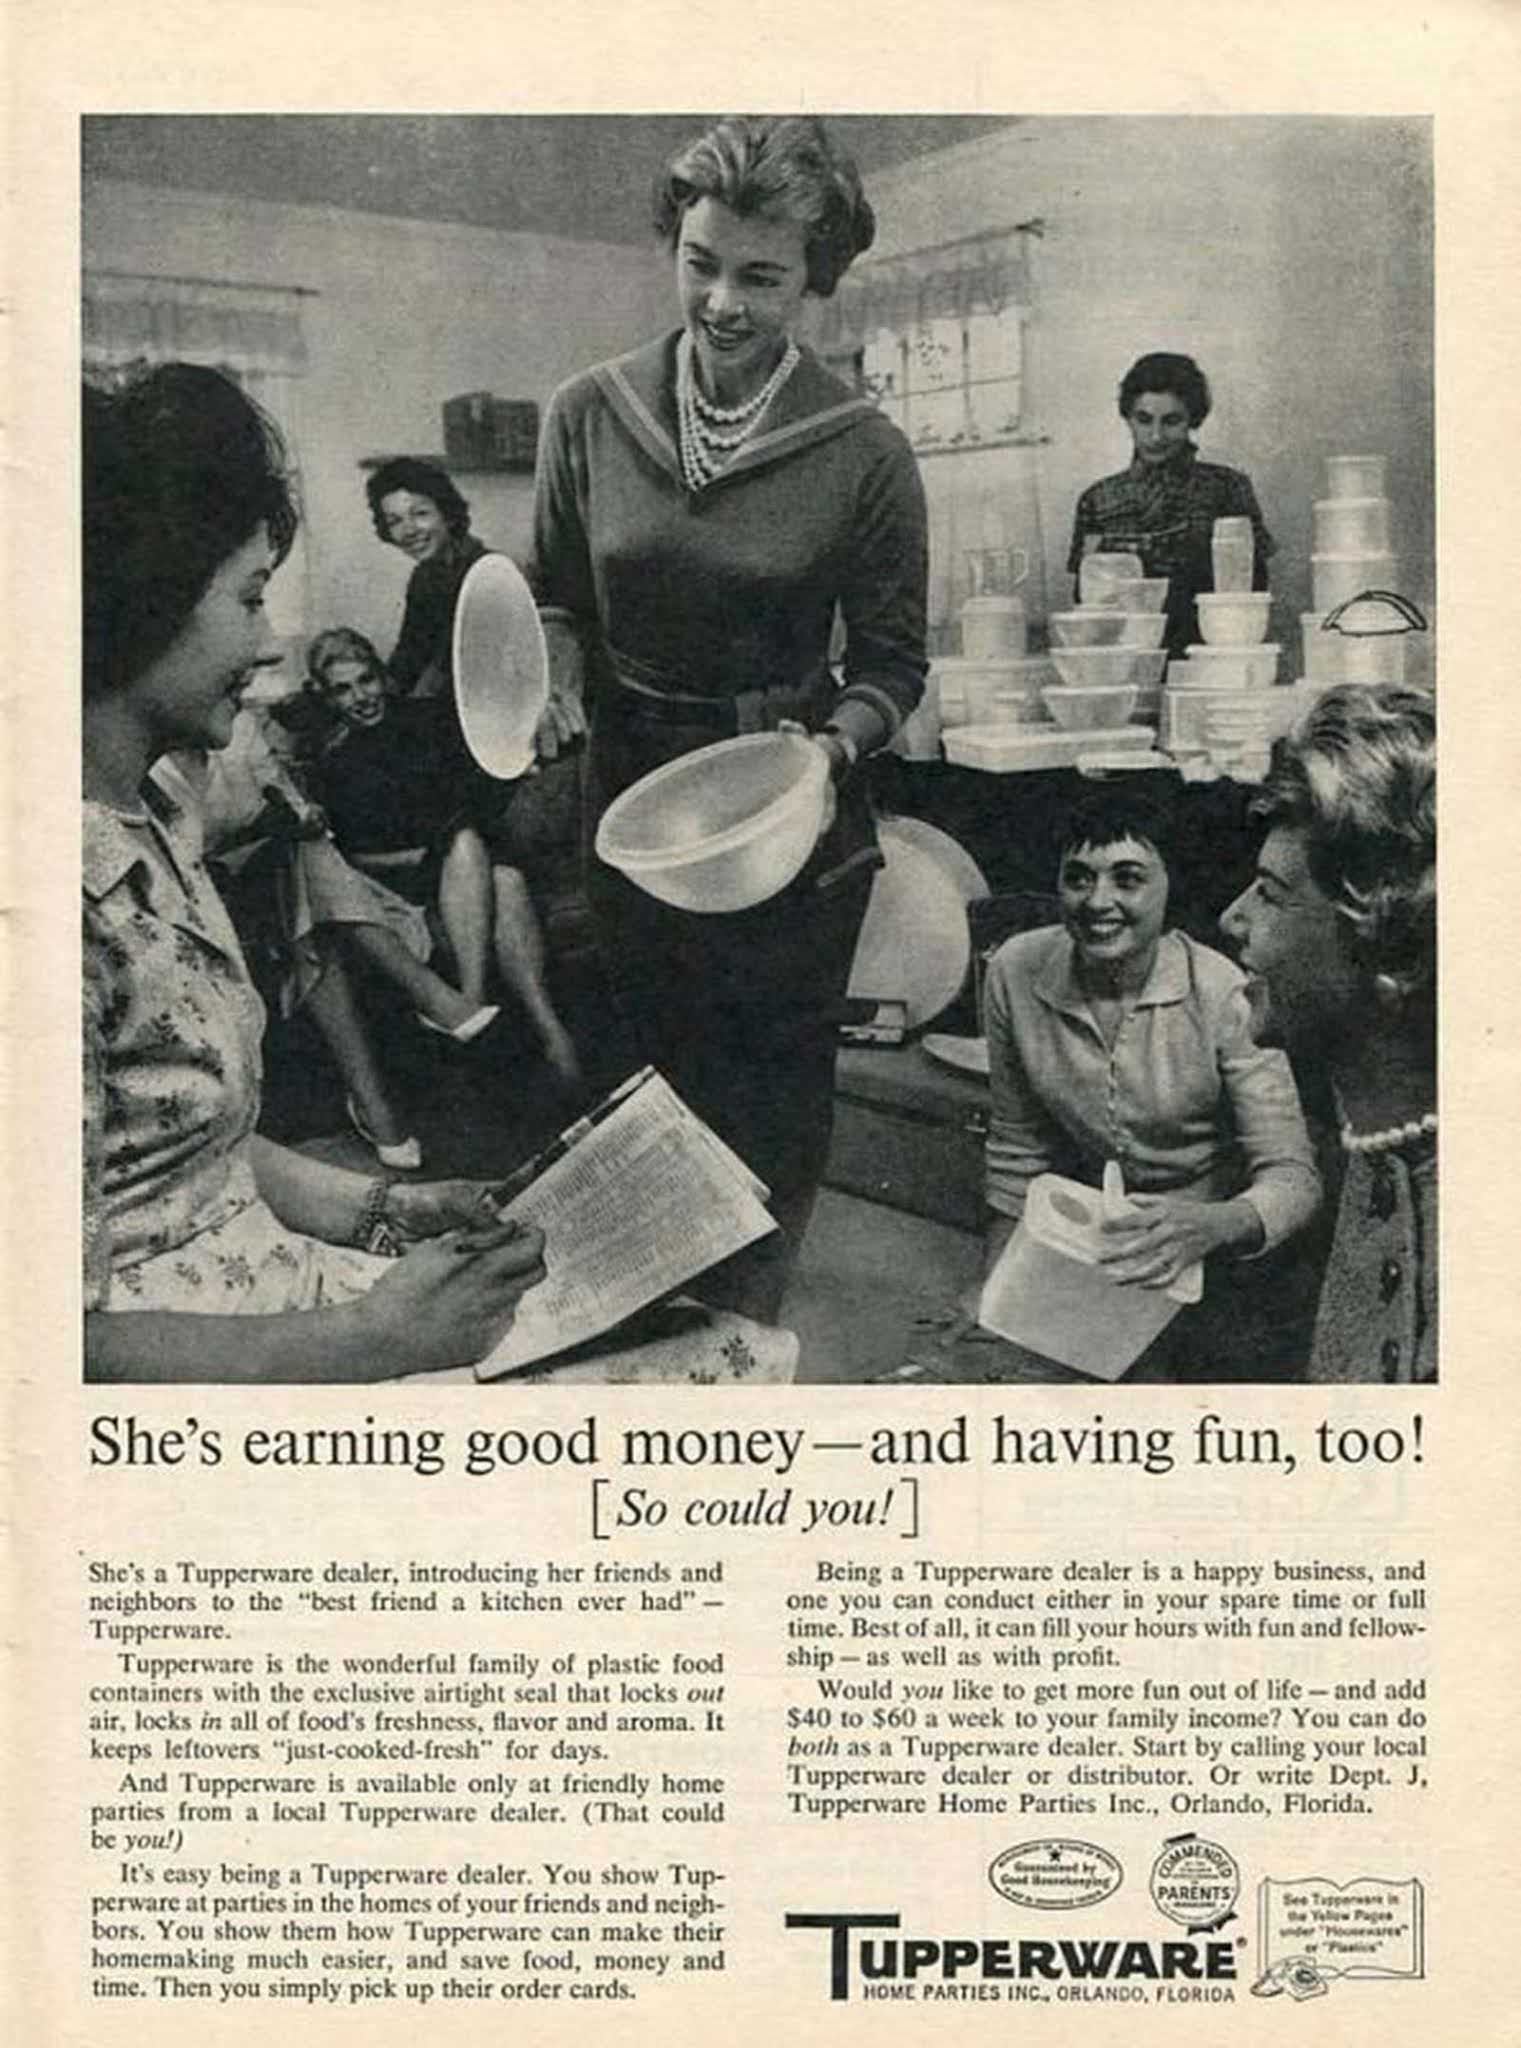 “She is earning good money and having fun, too!”, Tupperware ad.